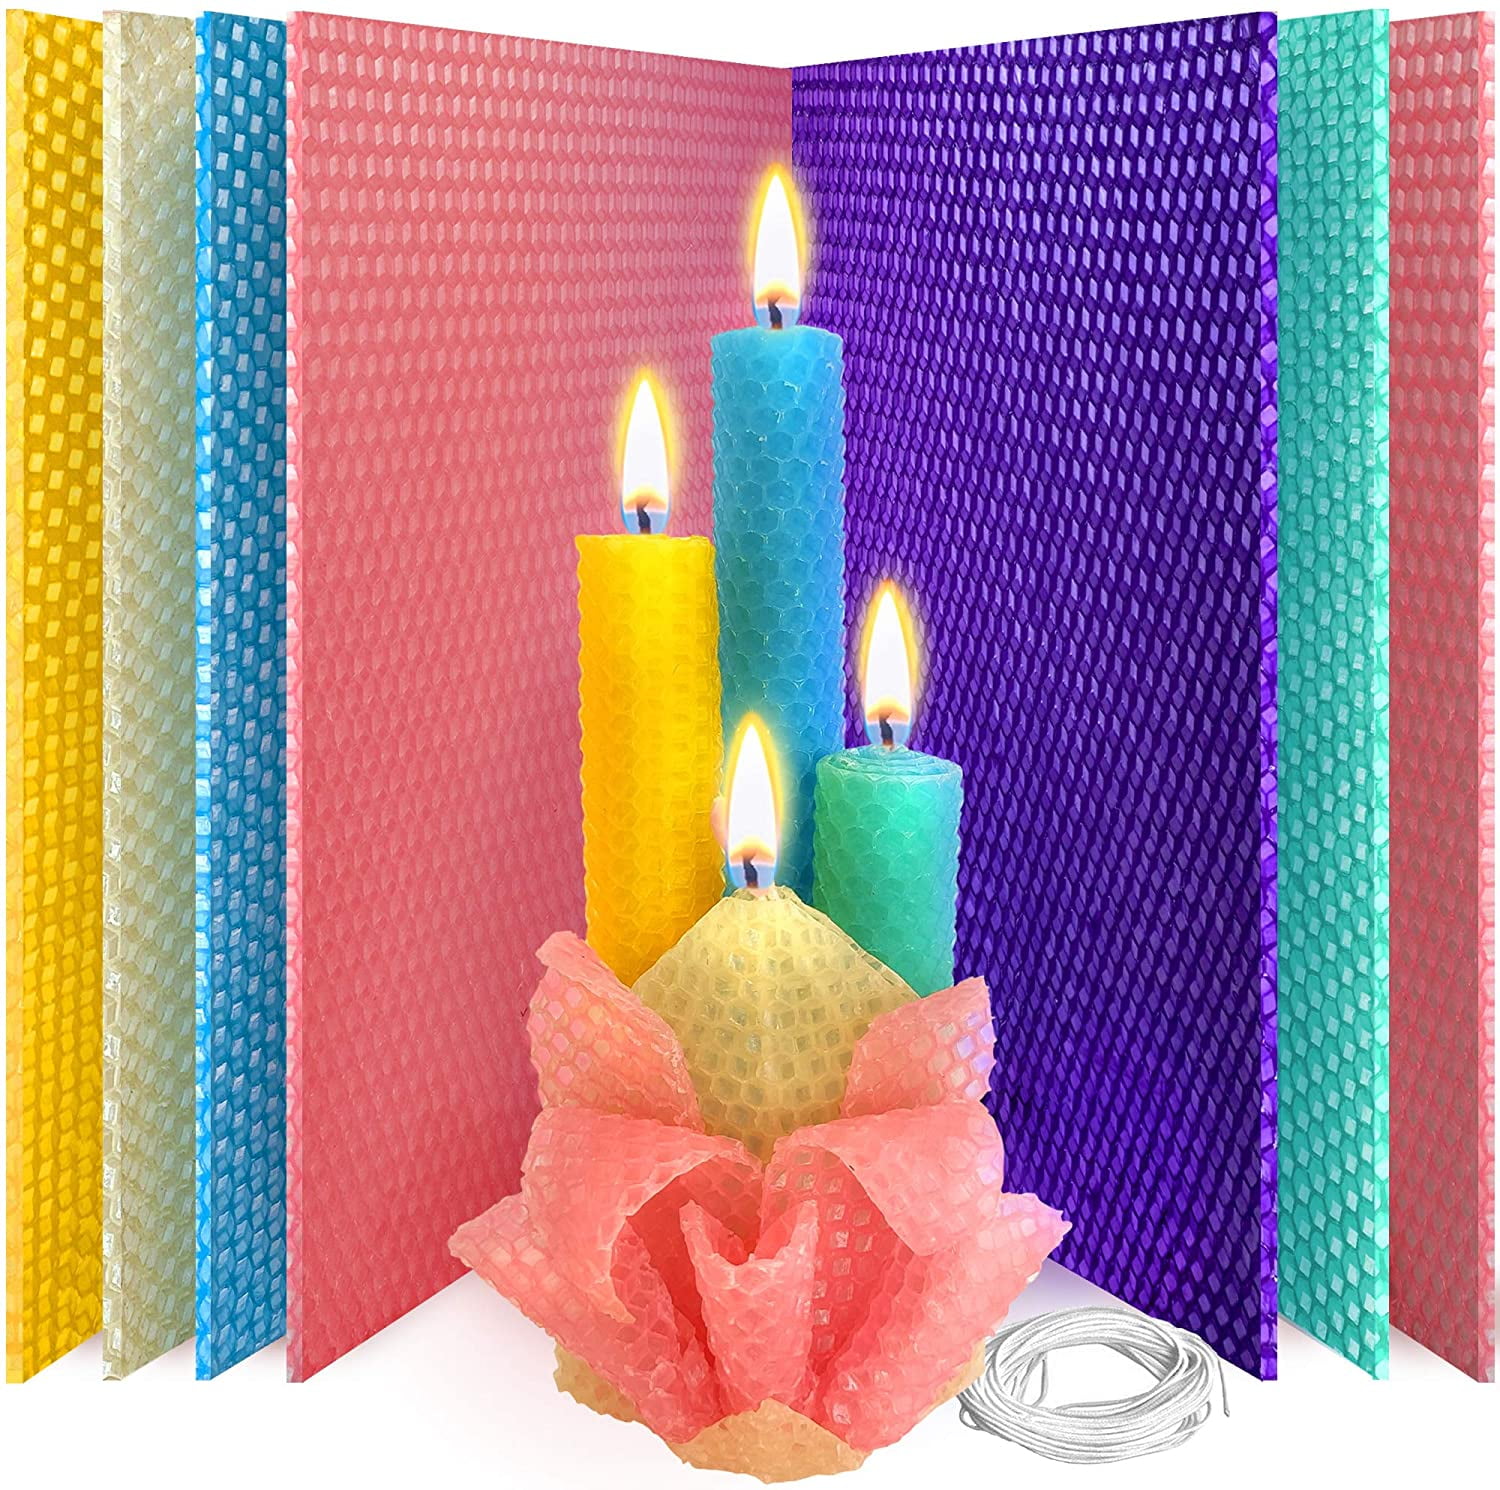 Sew Can Do: Kids Can Craft: Beeswax Candles